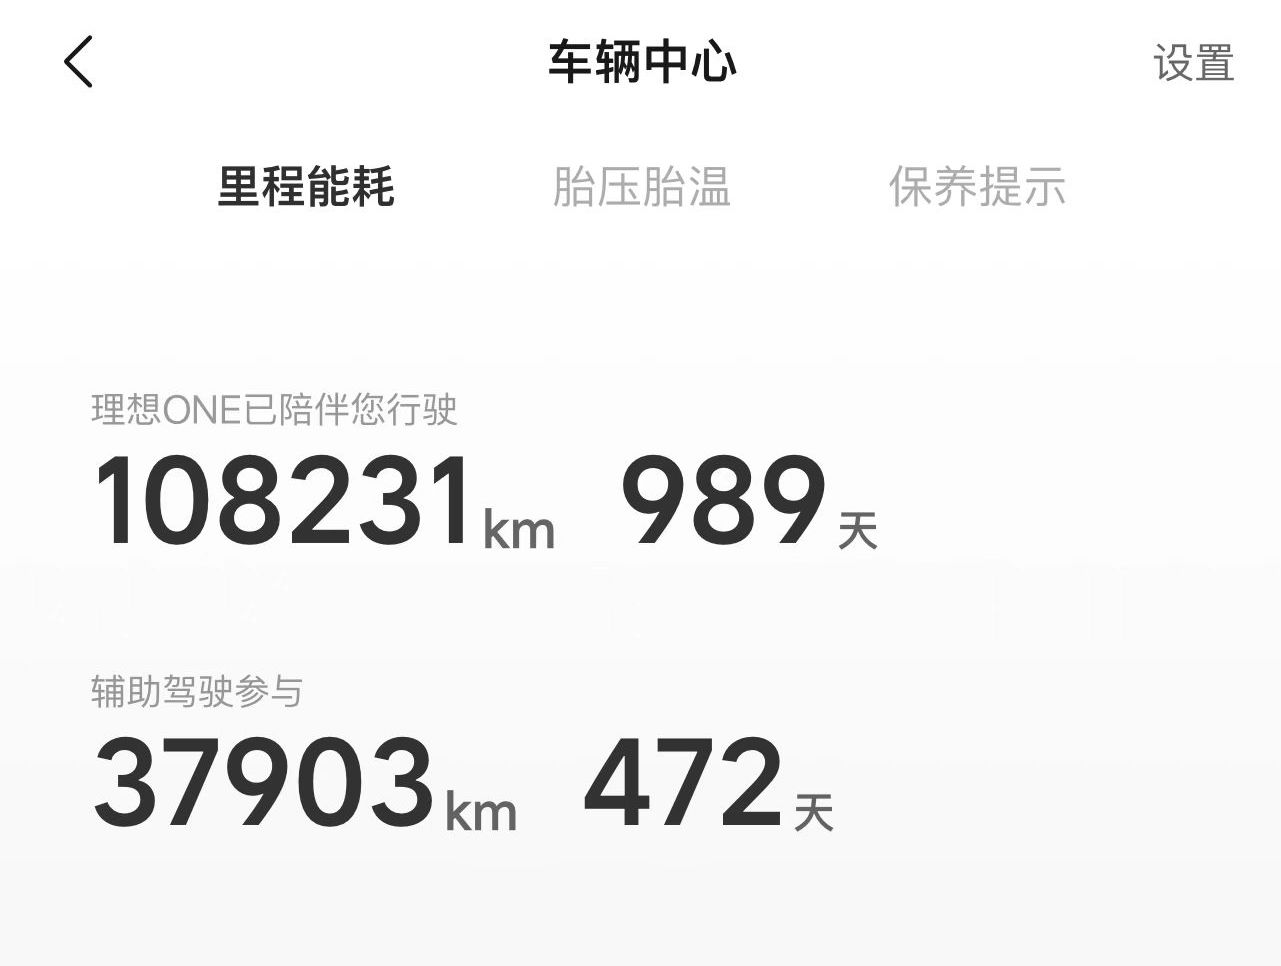 Already nearly 110,000 kilometers! Heavy fan of the auxiliary driving system!